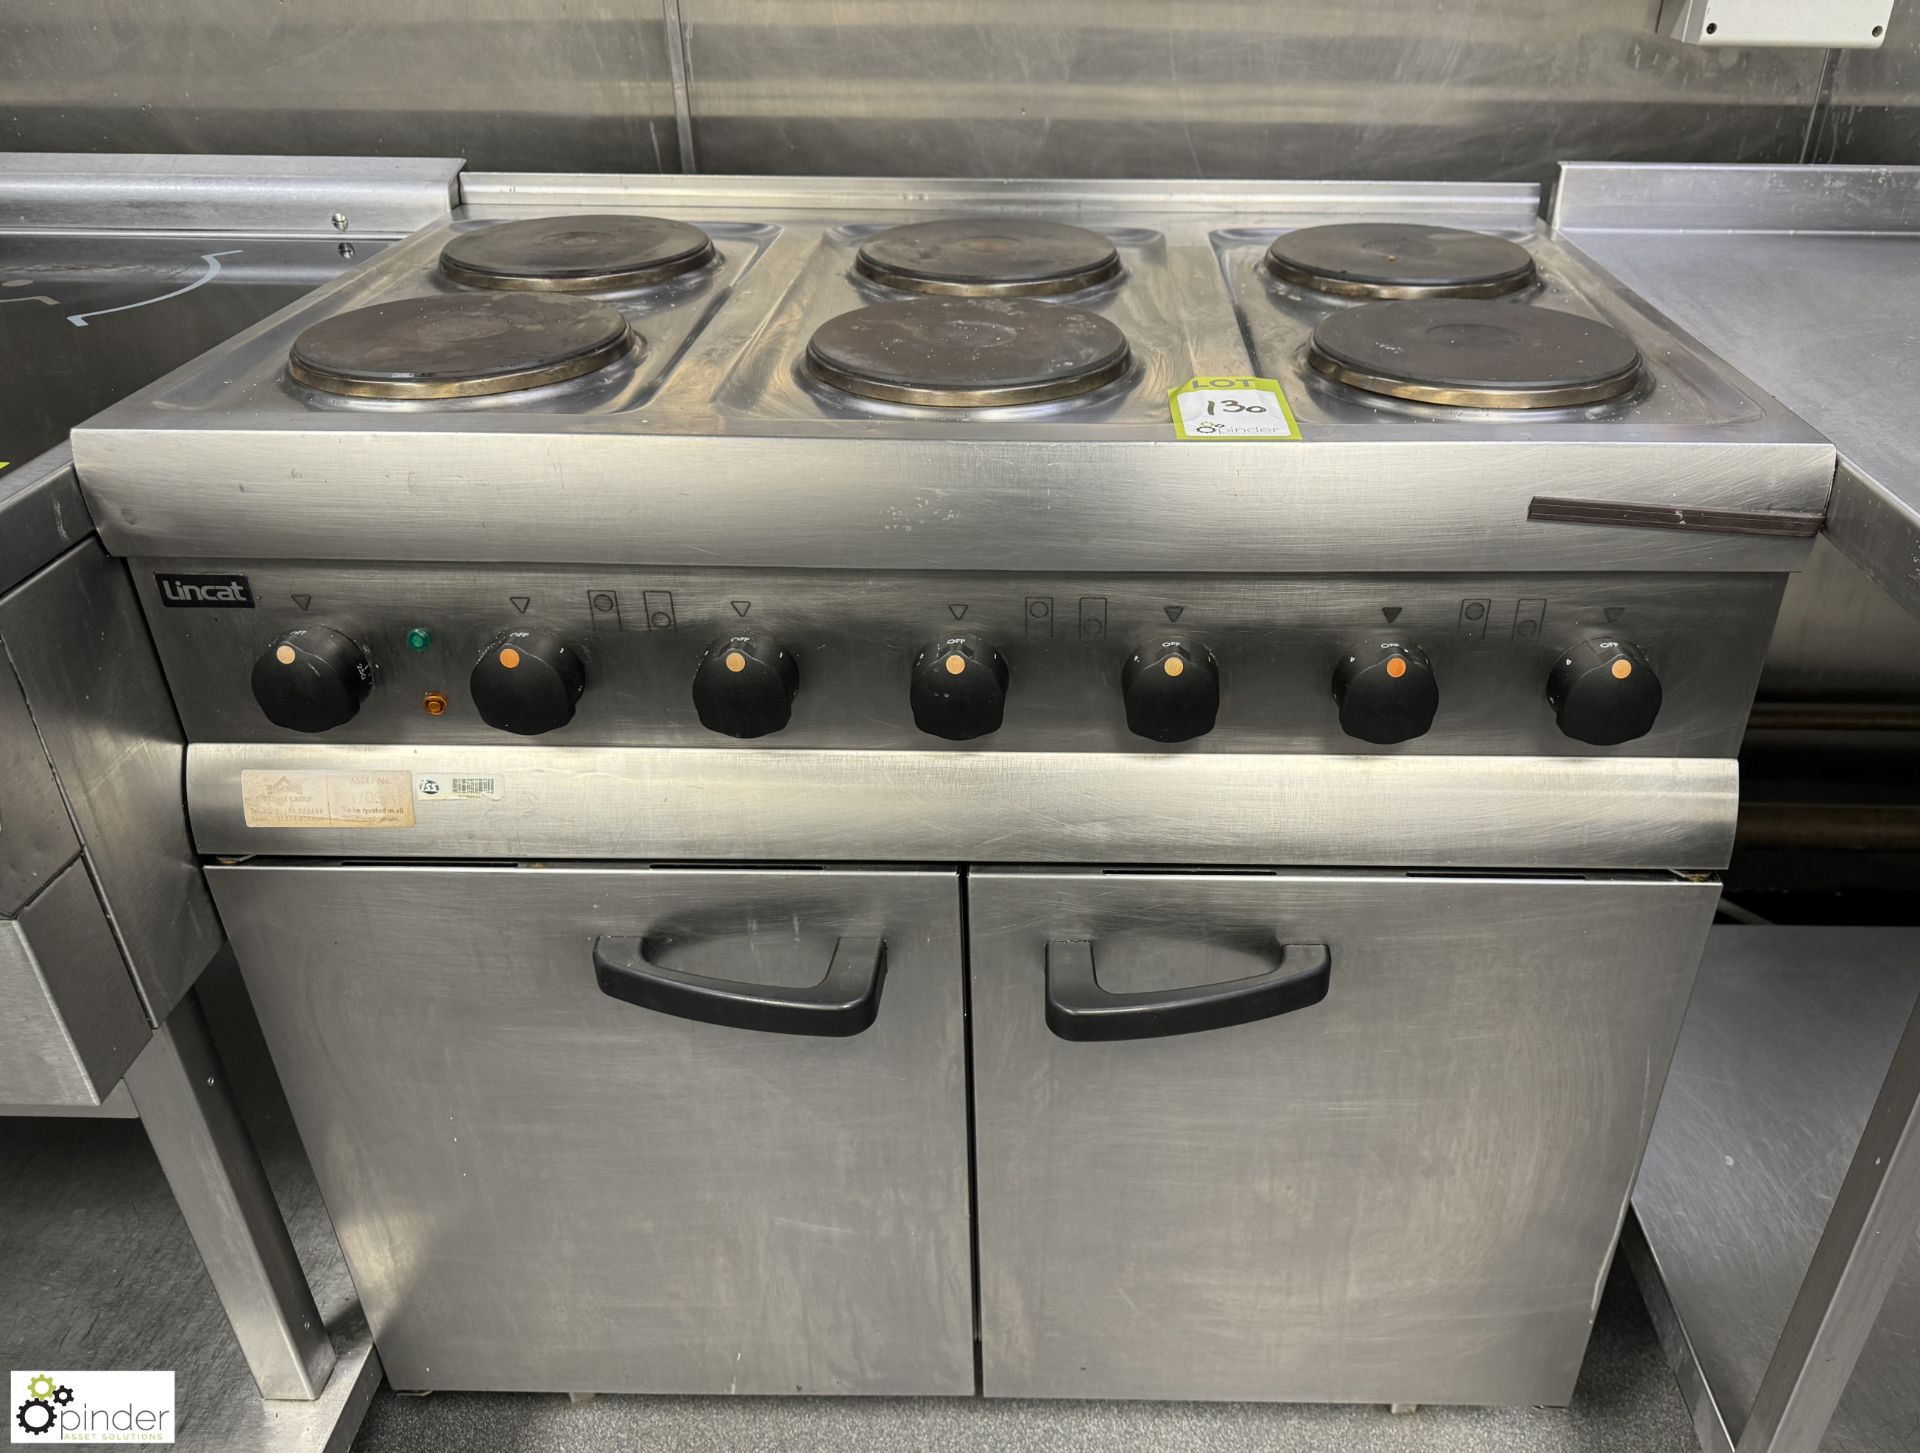 Lincat stainless steel electric 6-hob Cooking Range, 415volts, 900mm x 600mm x 900mm (location in